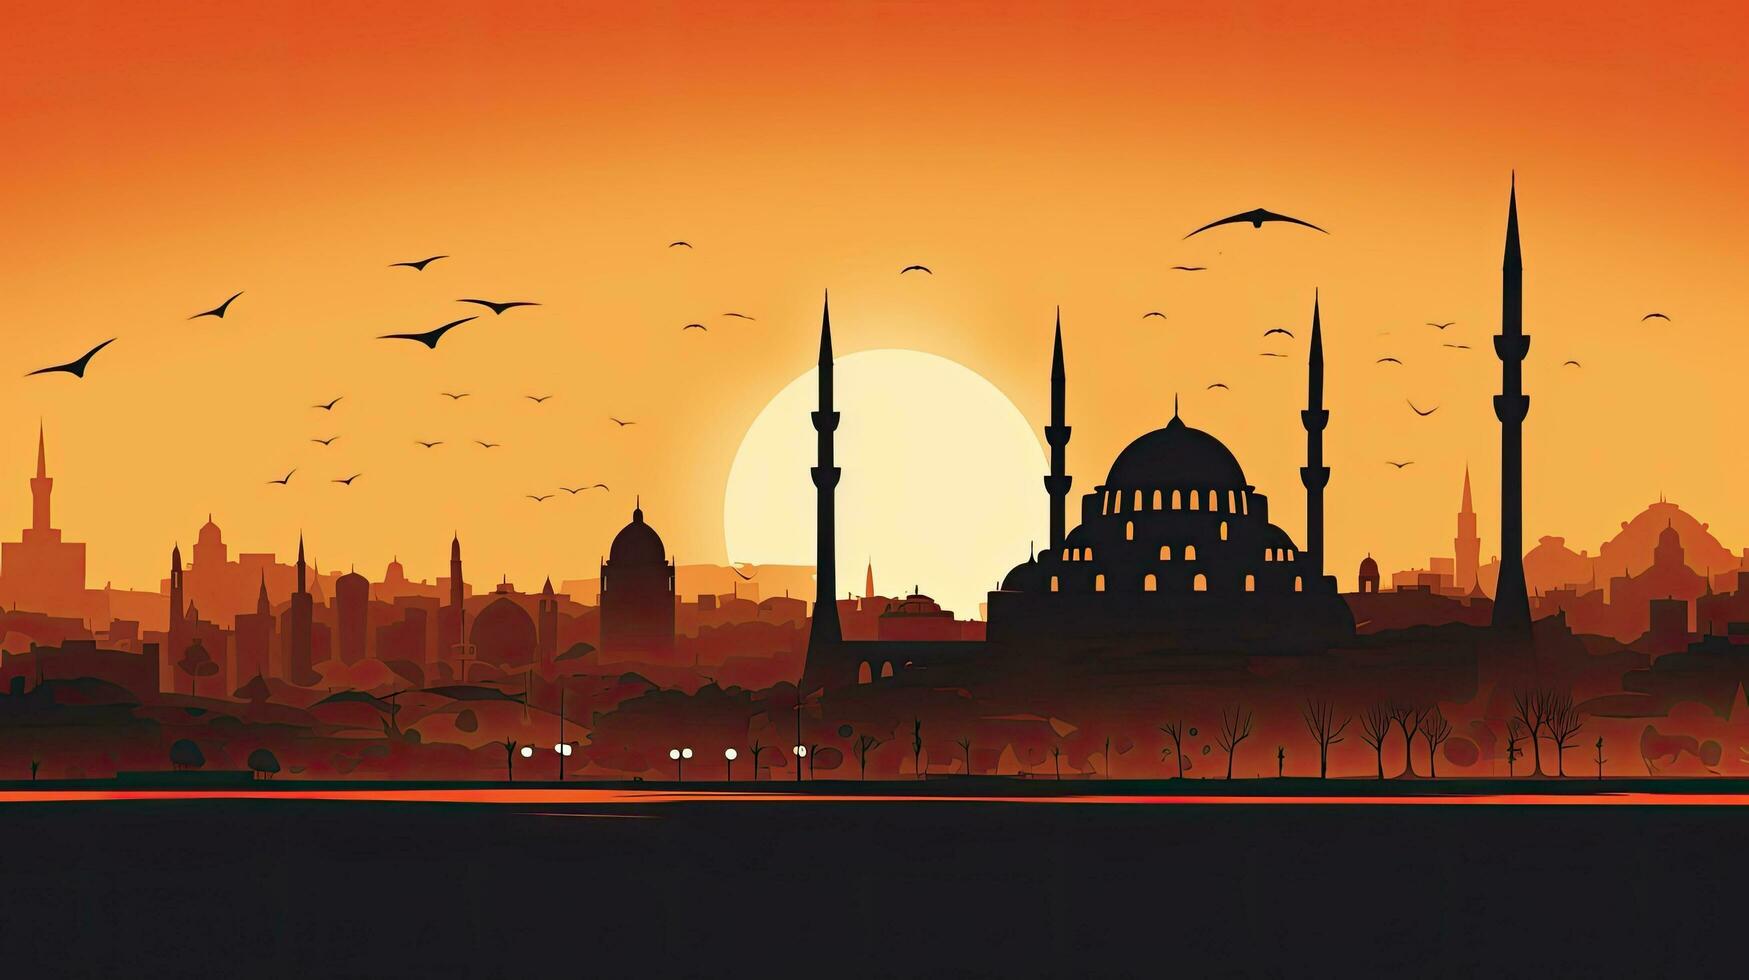 Famous historical Ottoman mosque in Istanbul Turkey popular tourism destination at sunset photo